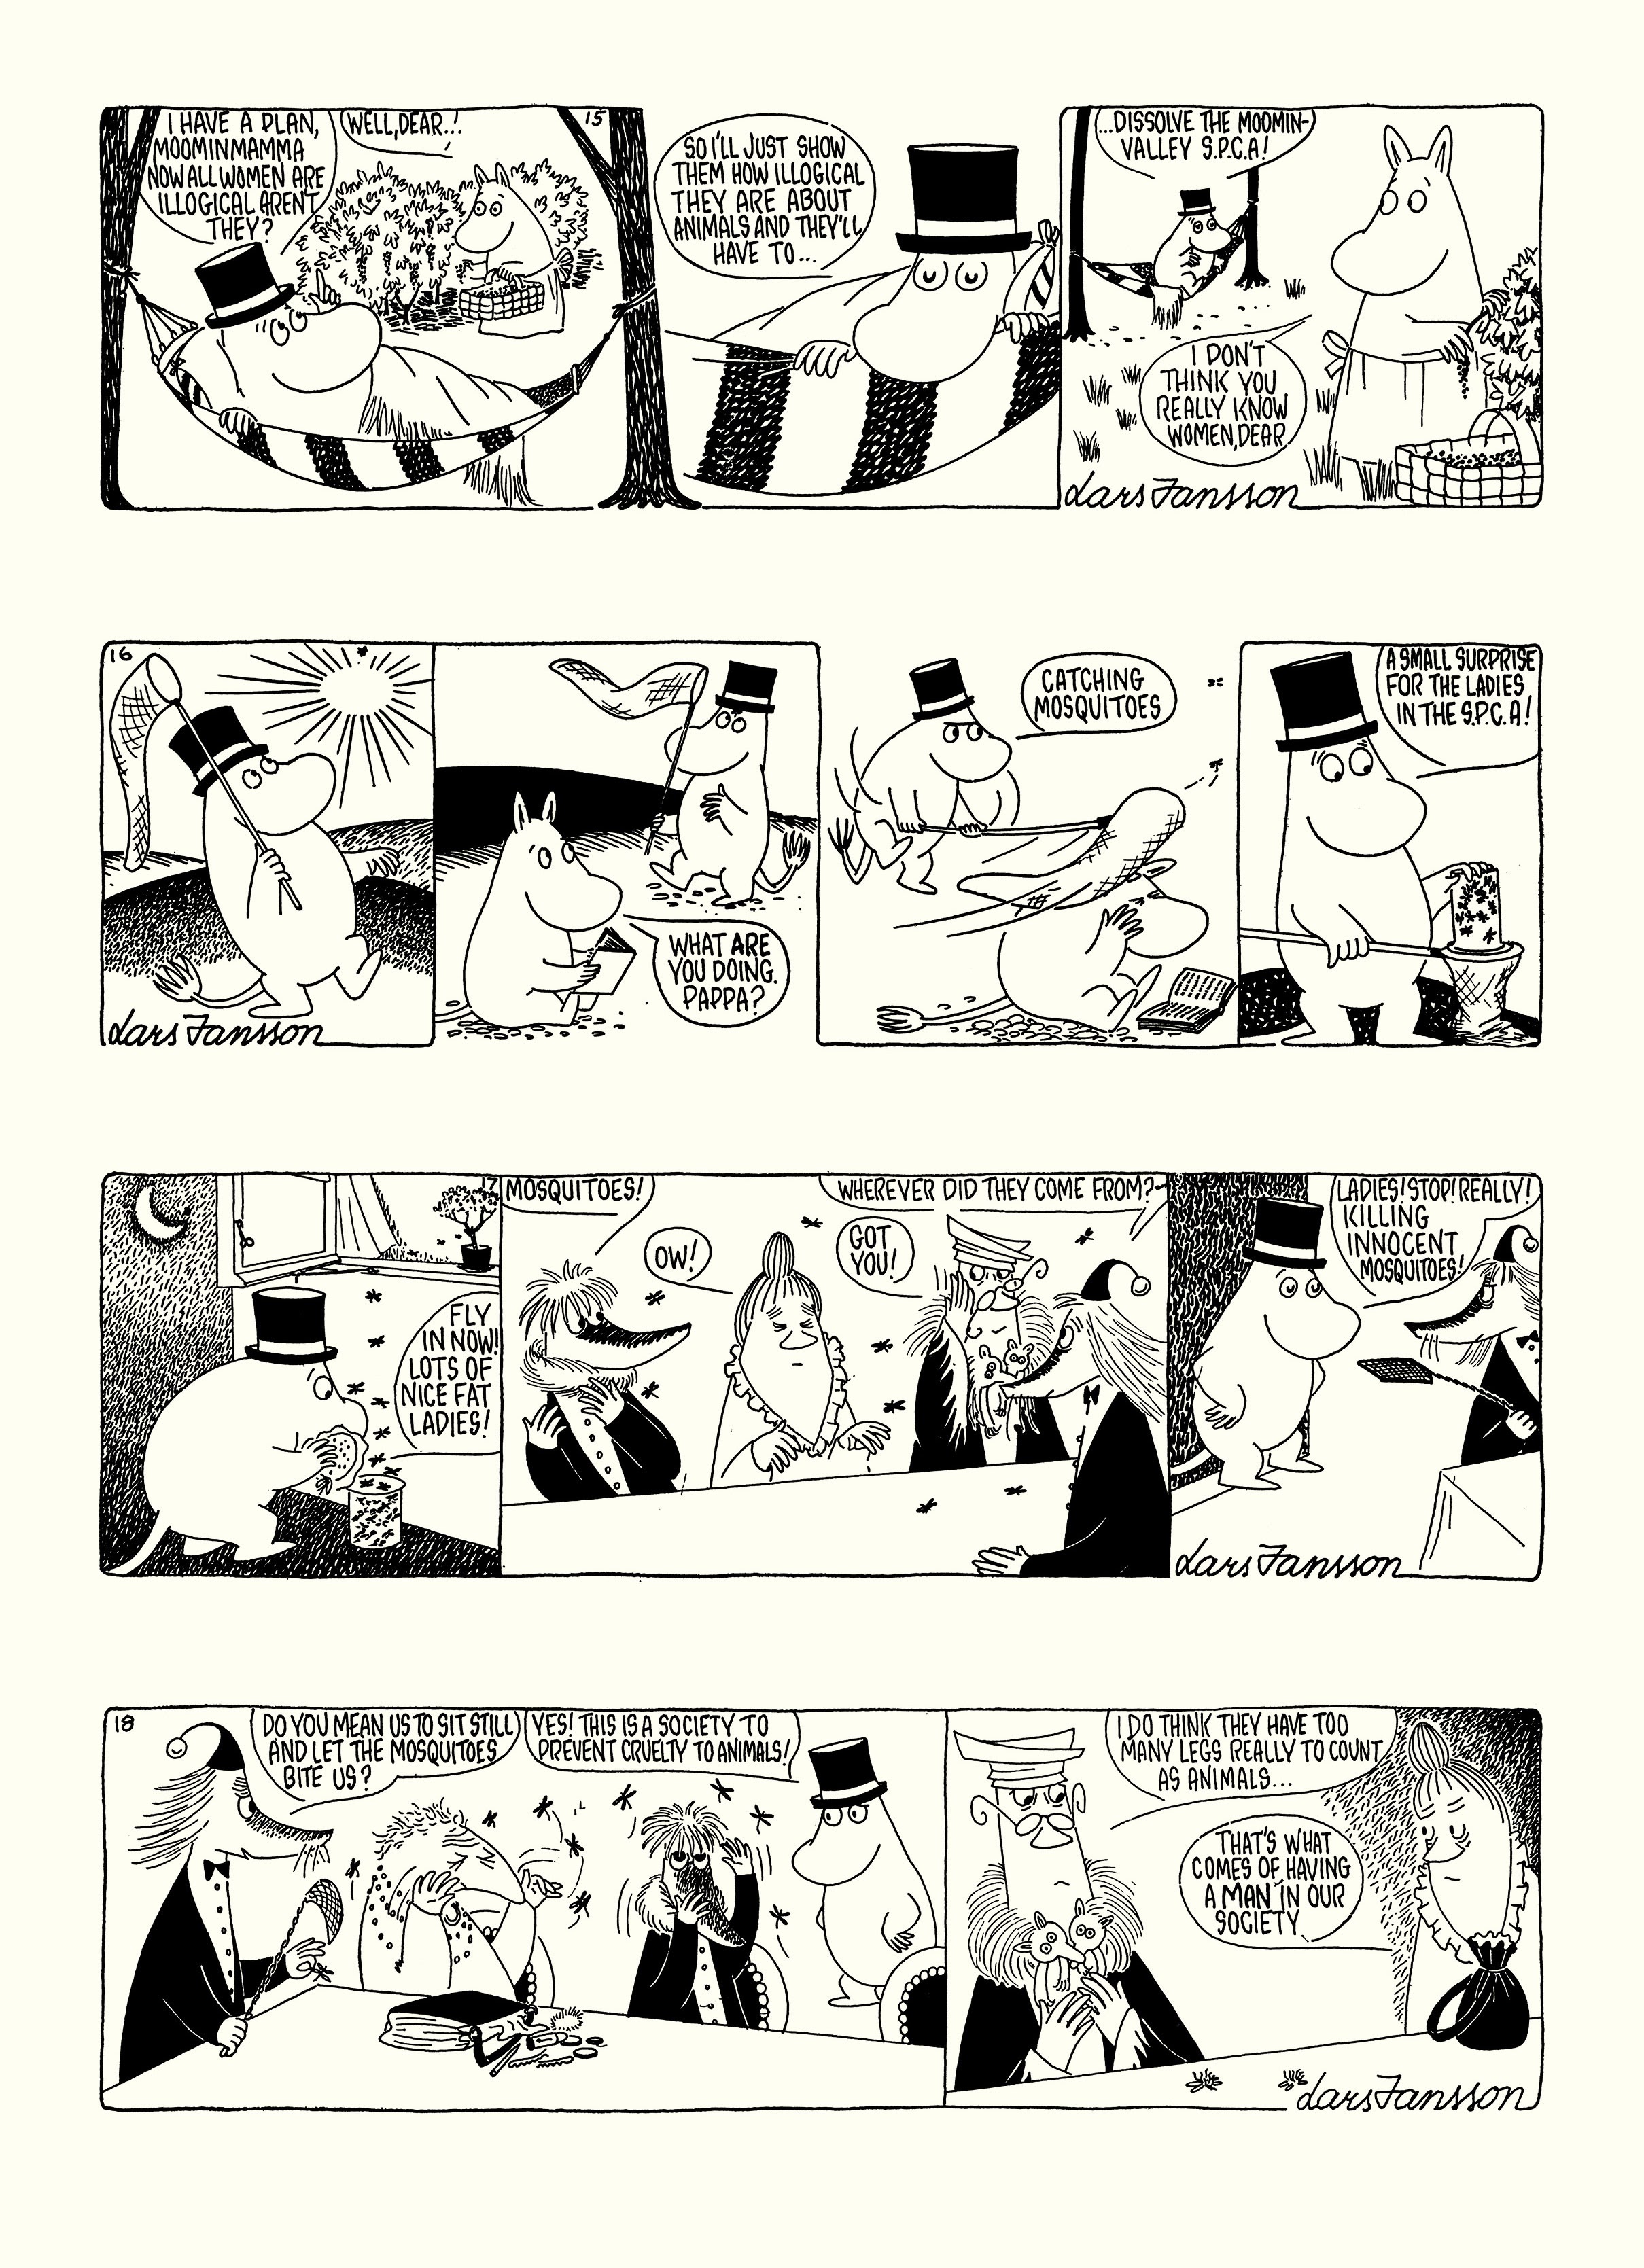 Read online Moomin: The Complete Lars Jansson Comic Strip comic -  Issue # TPB 6 - 72